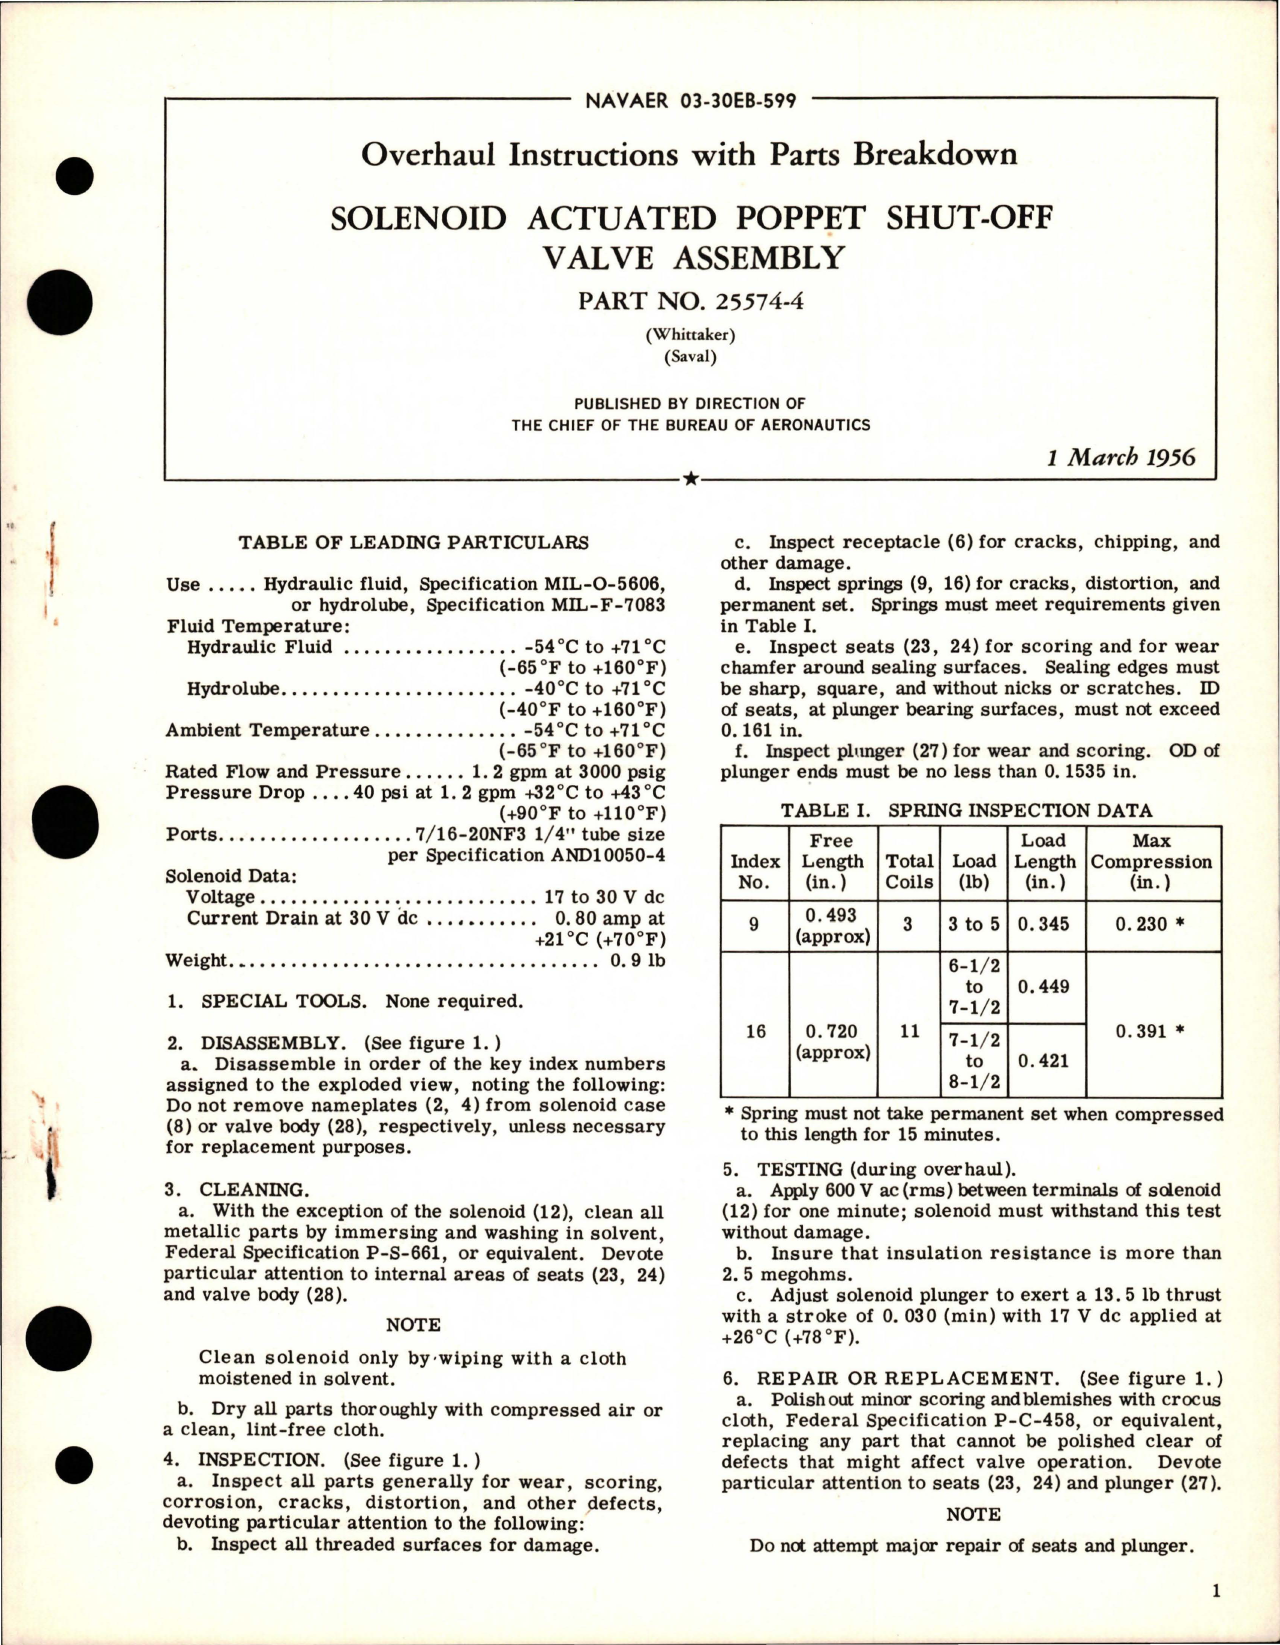 Sample page 1 from AirCorps Library document: Overhaul Instructions with Parts for Solenoid Actuated Poppet Shut Off Valve Assembly - Part 25574-4